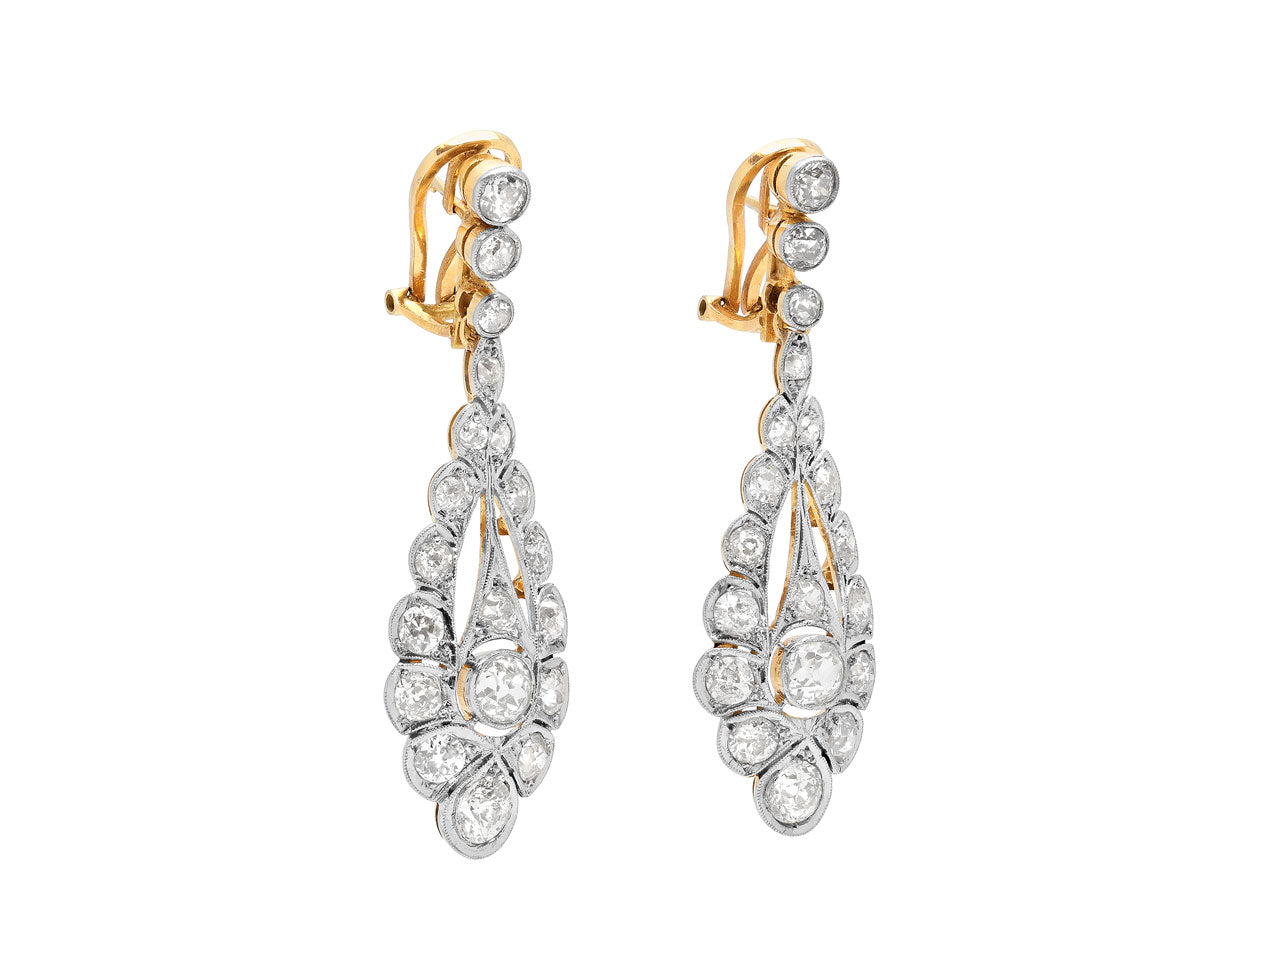 Edwardian Diamond Earrings in Platinum and 18K Gold